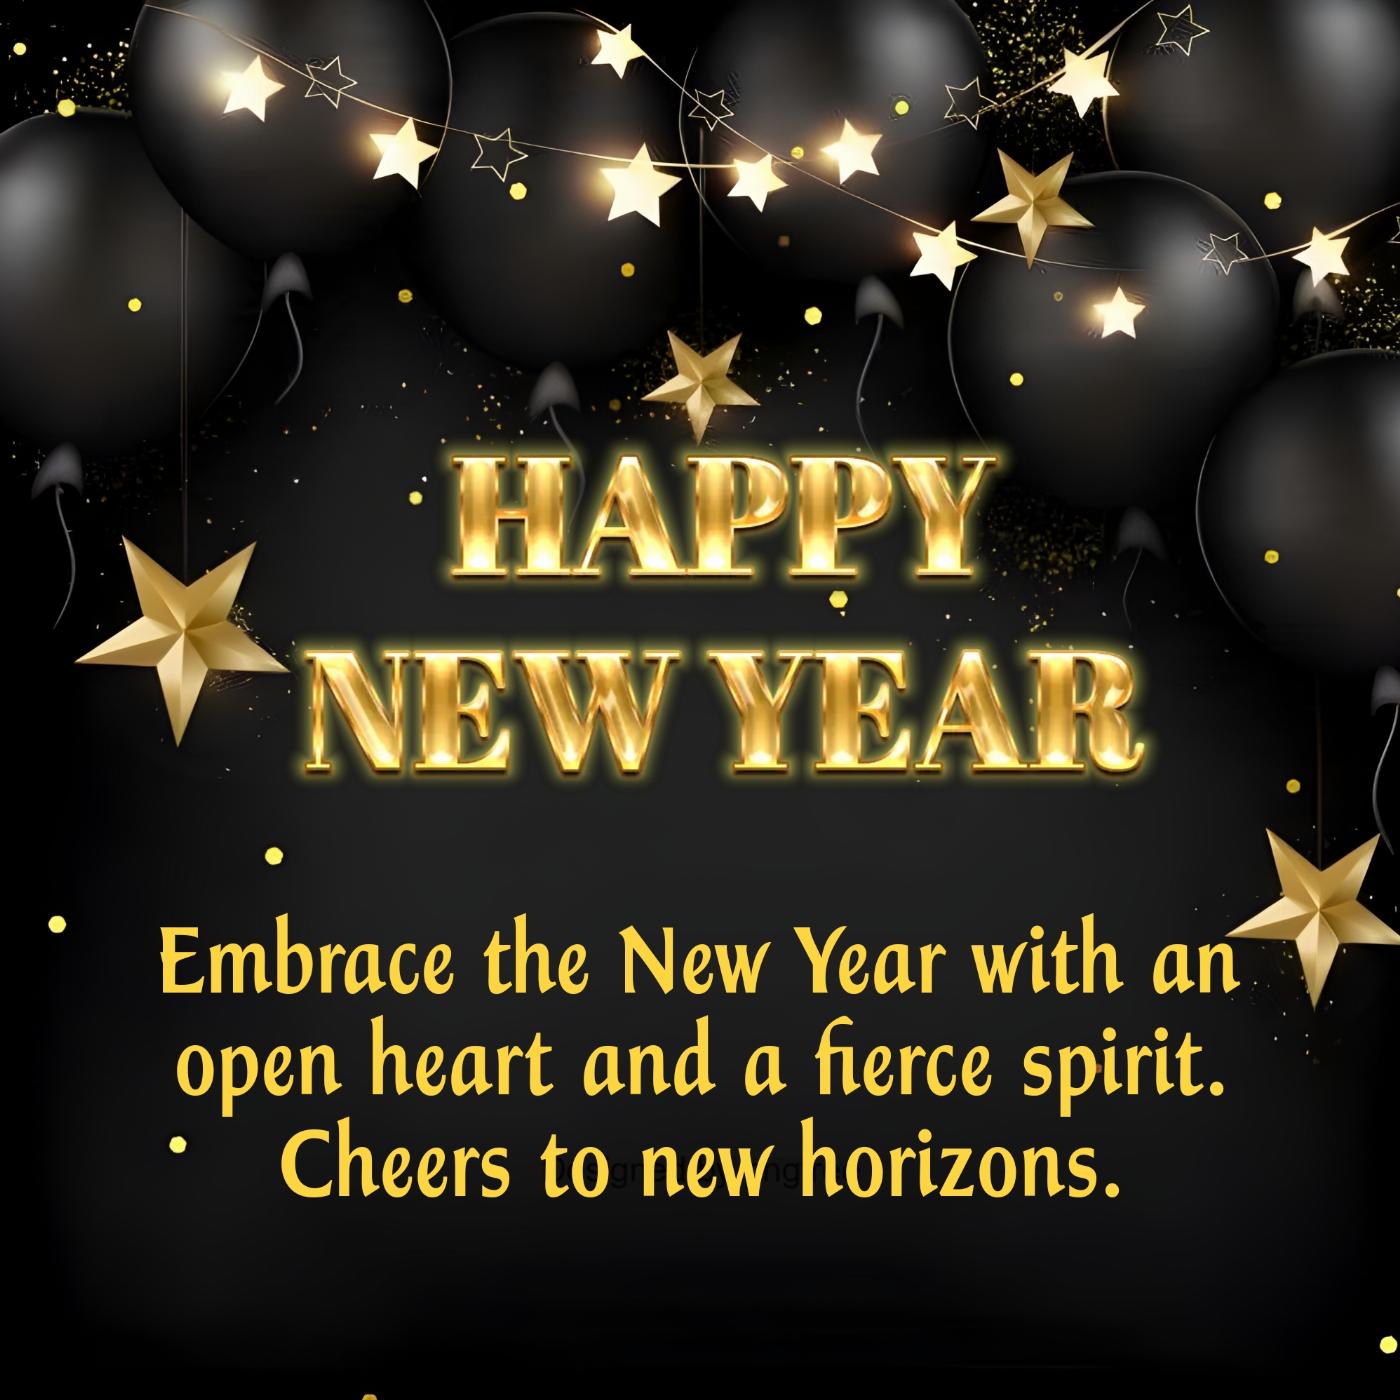 Embrace the New Year with an open heart and a fierce spirit